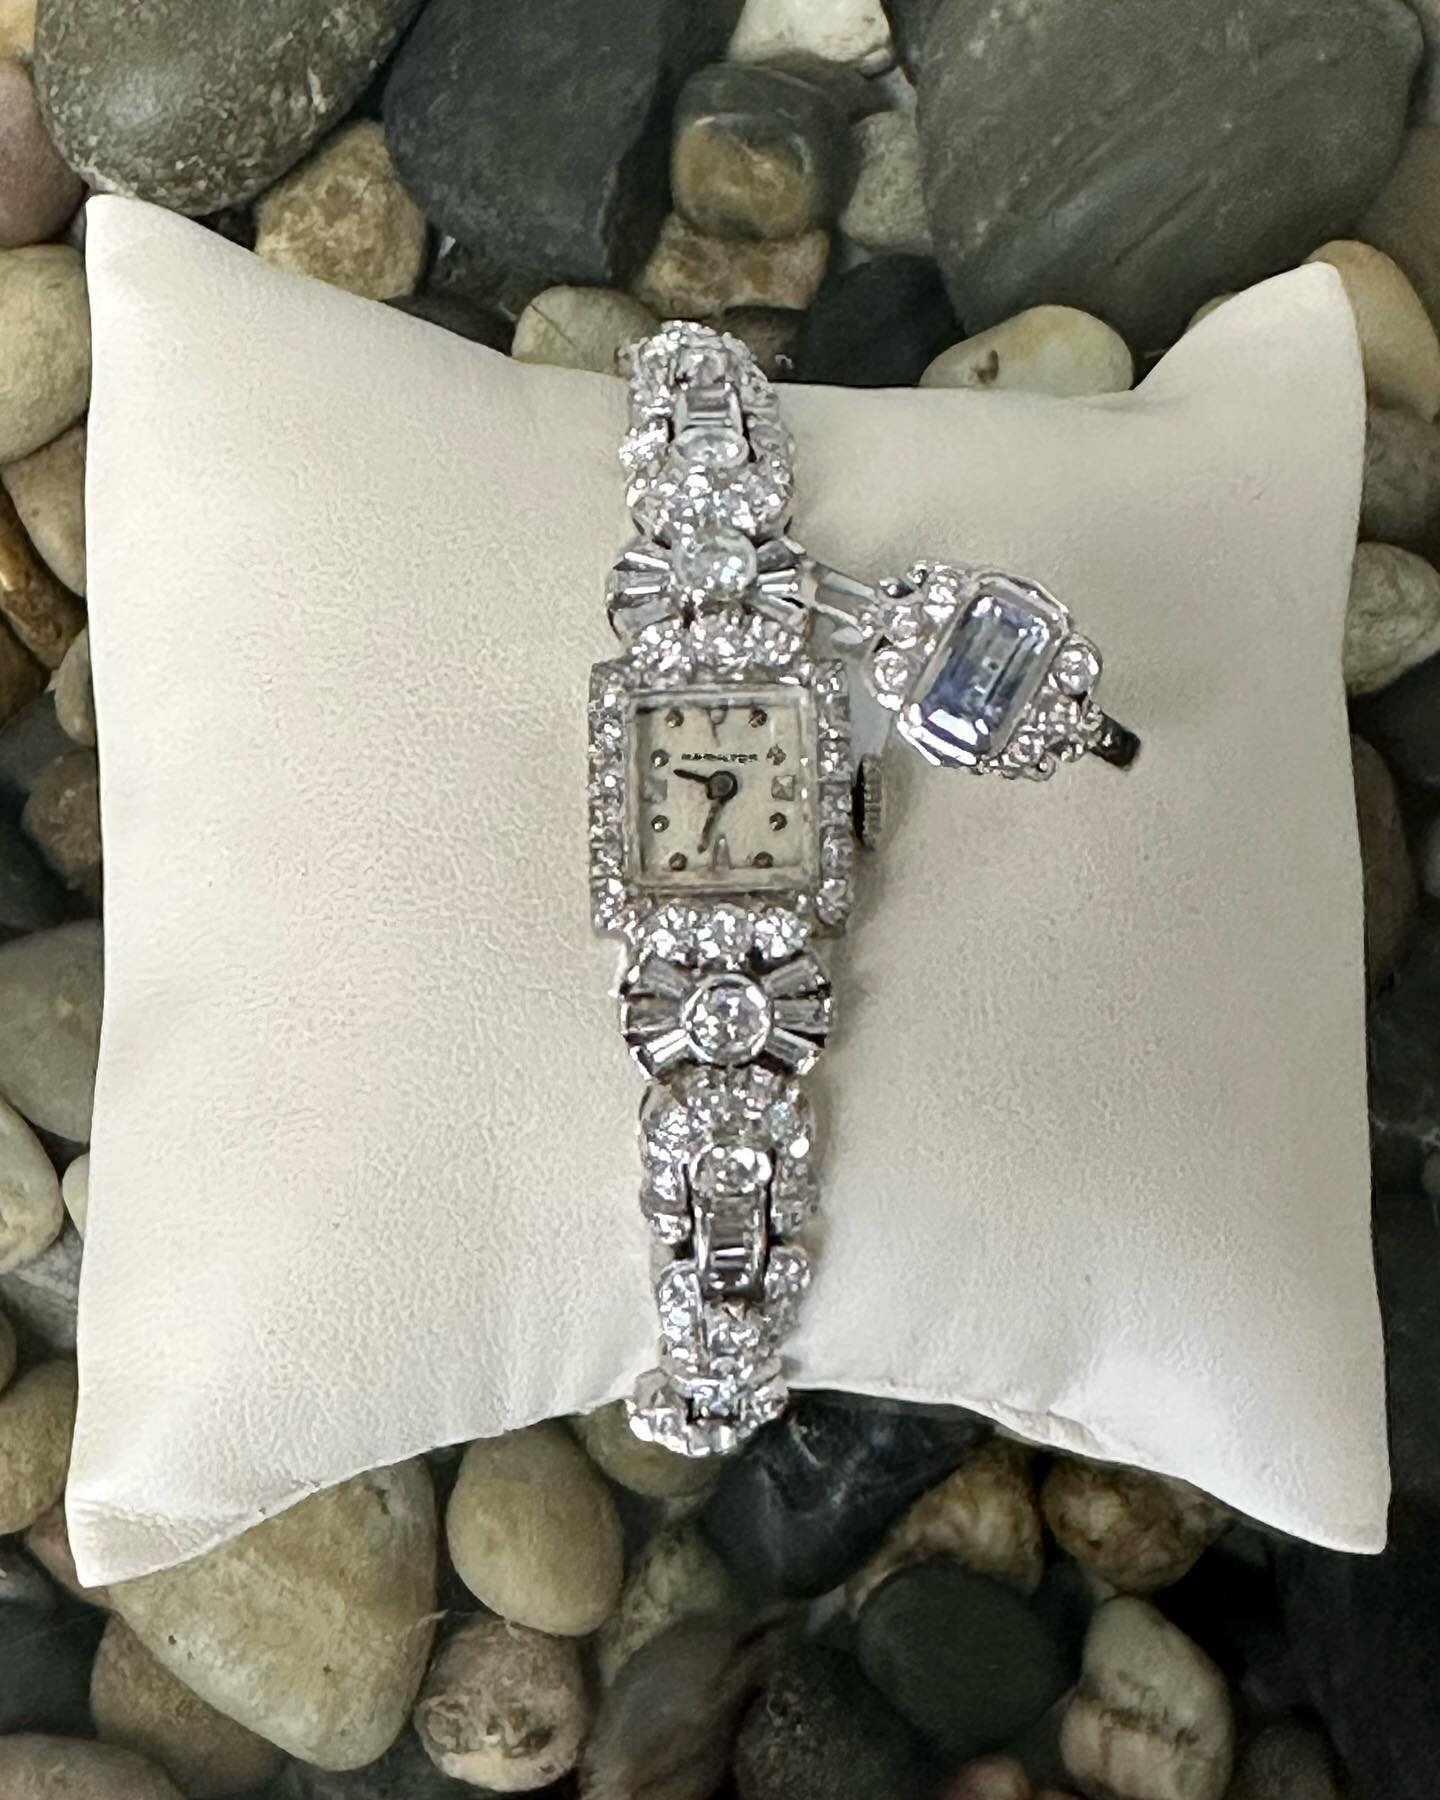 What time is it? Diamond time! This watch is available in So Me during our Jewelry Estate Sale going on from now until Saturday at 5pm! #jewelryestatesale #alwaystimefordiamonds #vintagewatchforsale #somepgh #newtoyou